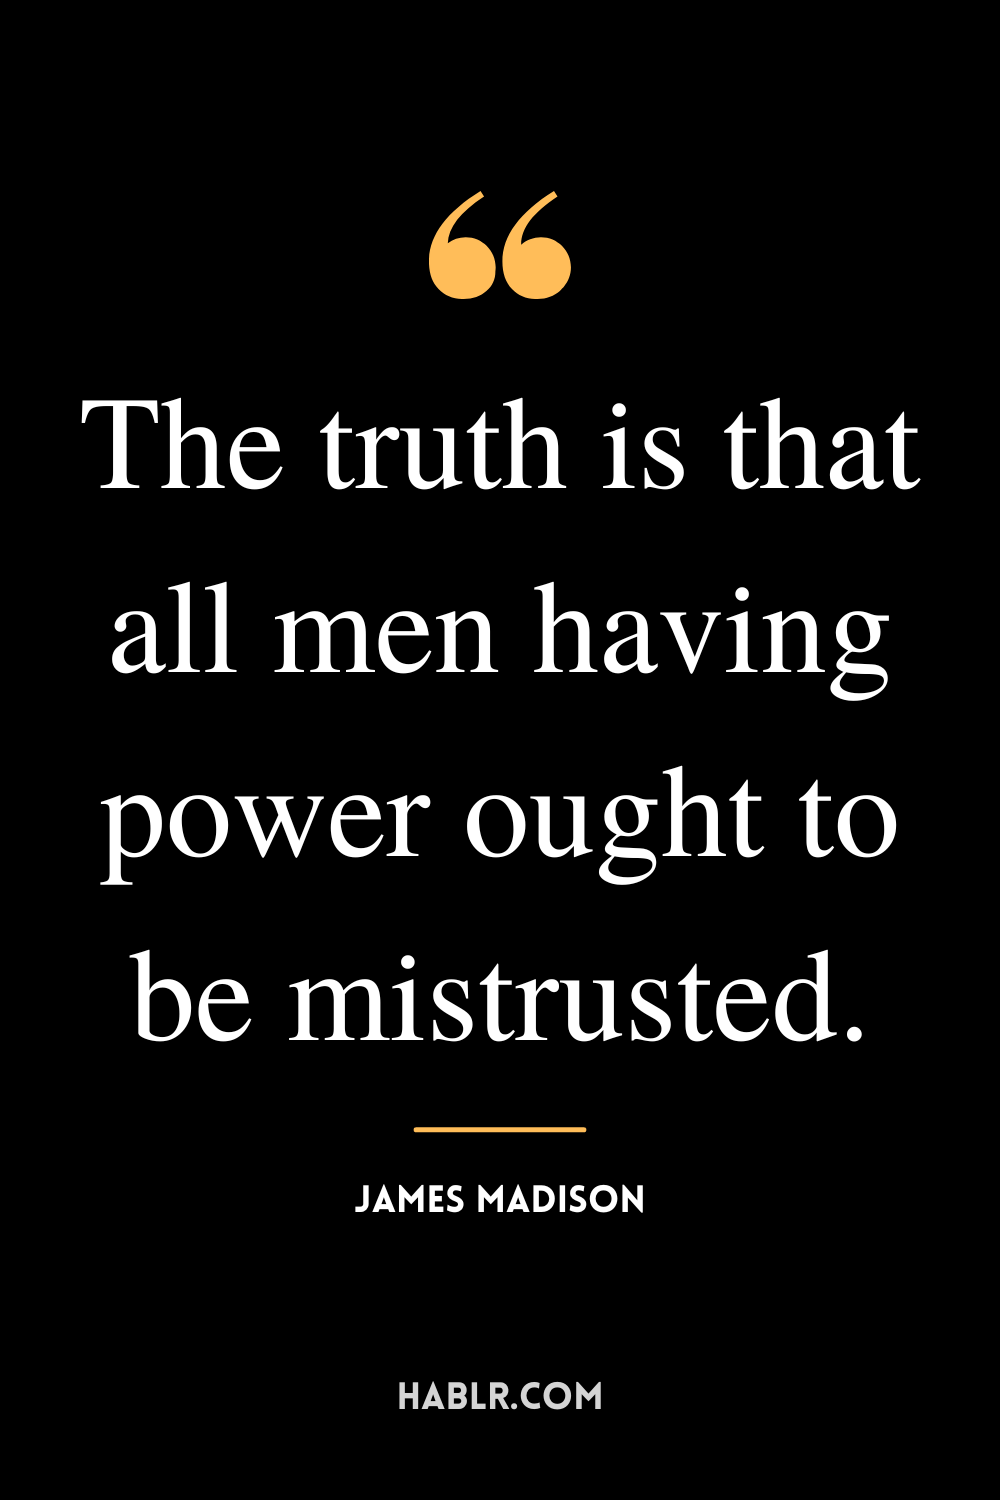 “The truth is that all men having power ought to be mistrusted.” -James Madison